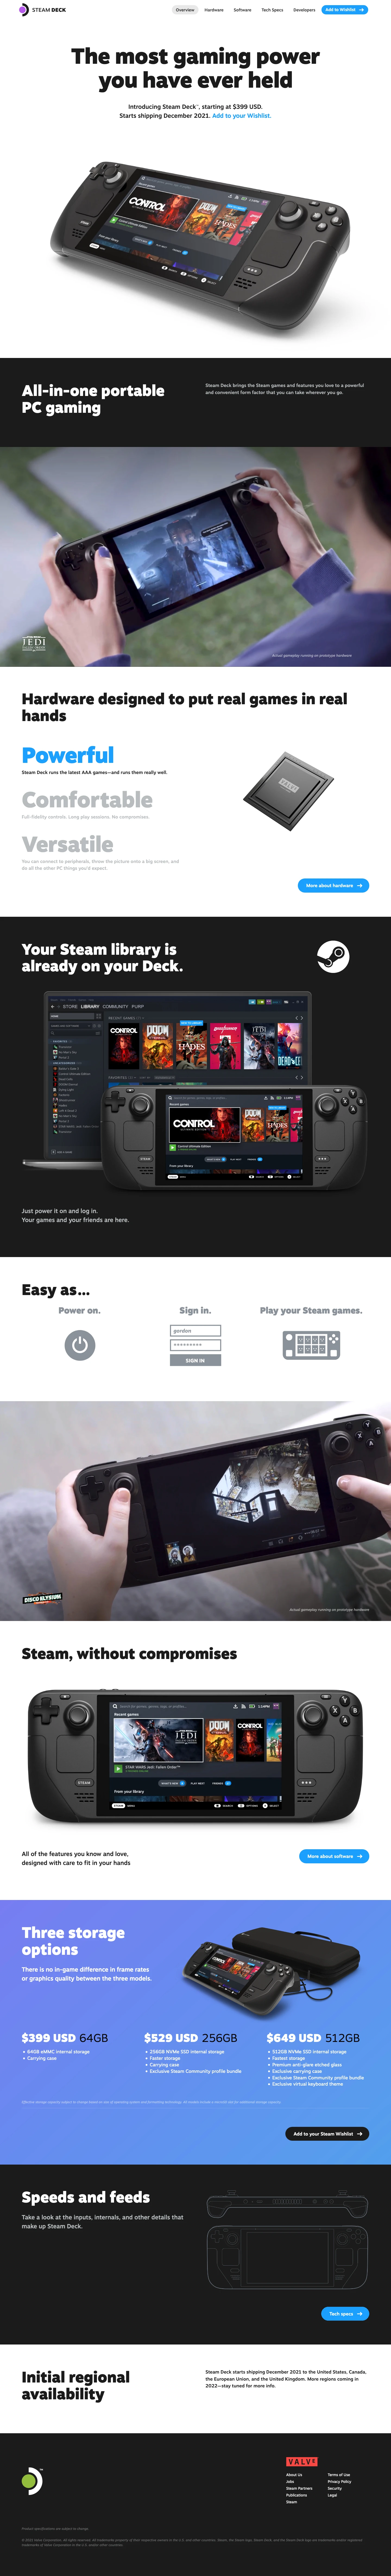 Steam Deck Landing Page Example: The most gaming power you have ever held. Steam Deck is a powerful handheld gaming PC that delivers the Steam games and features you love.